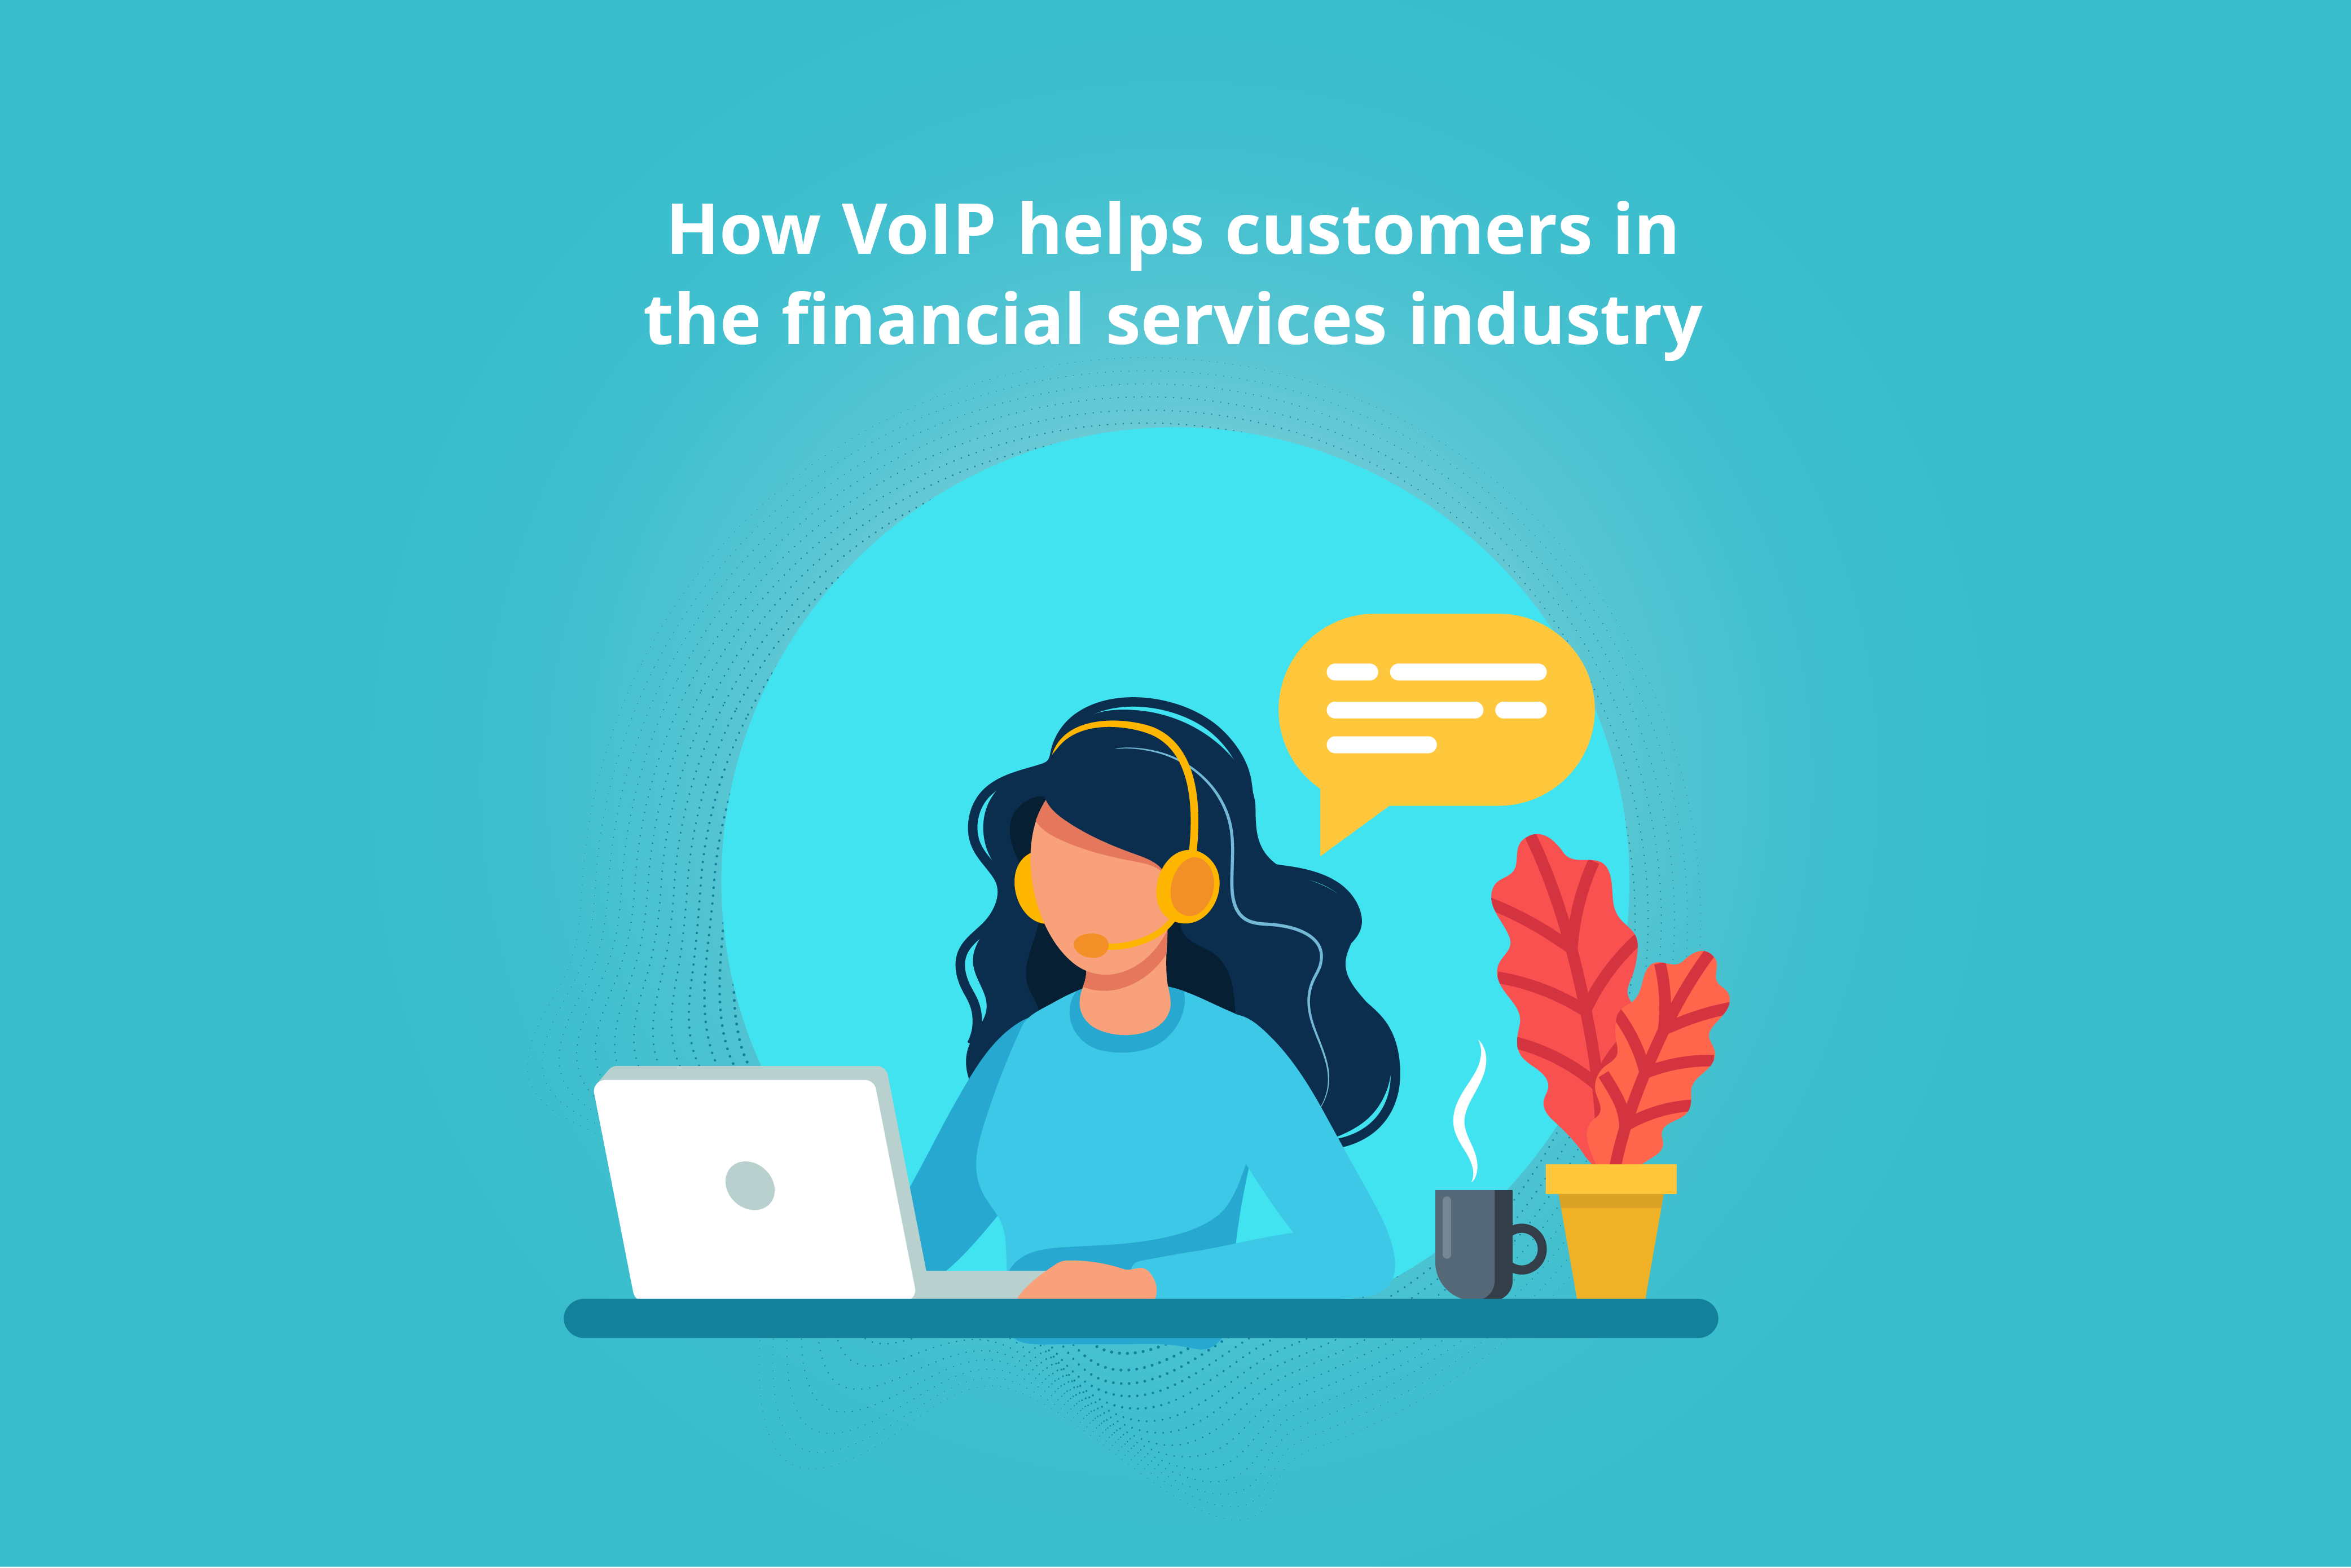 VoIP for financial services industry.